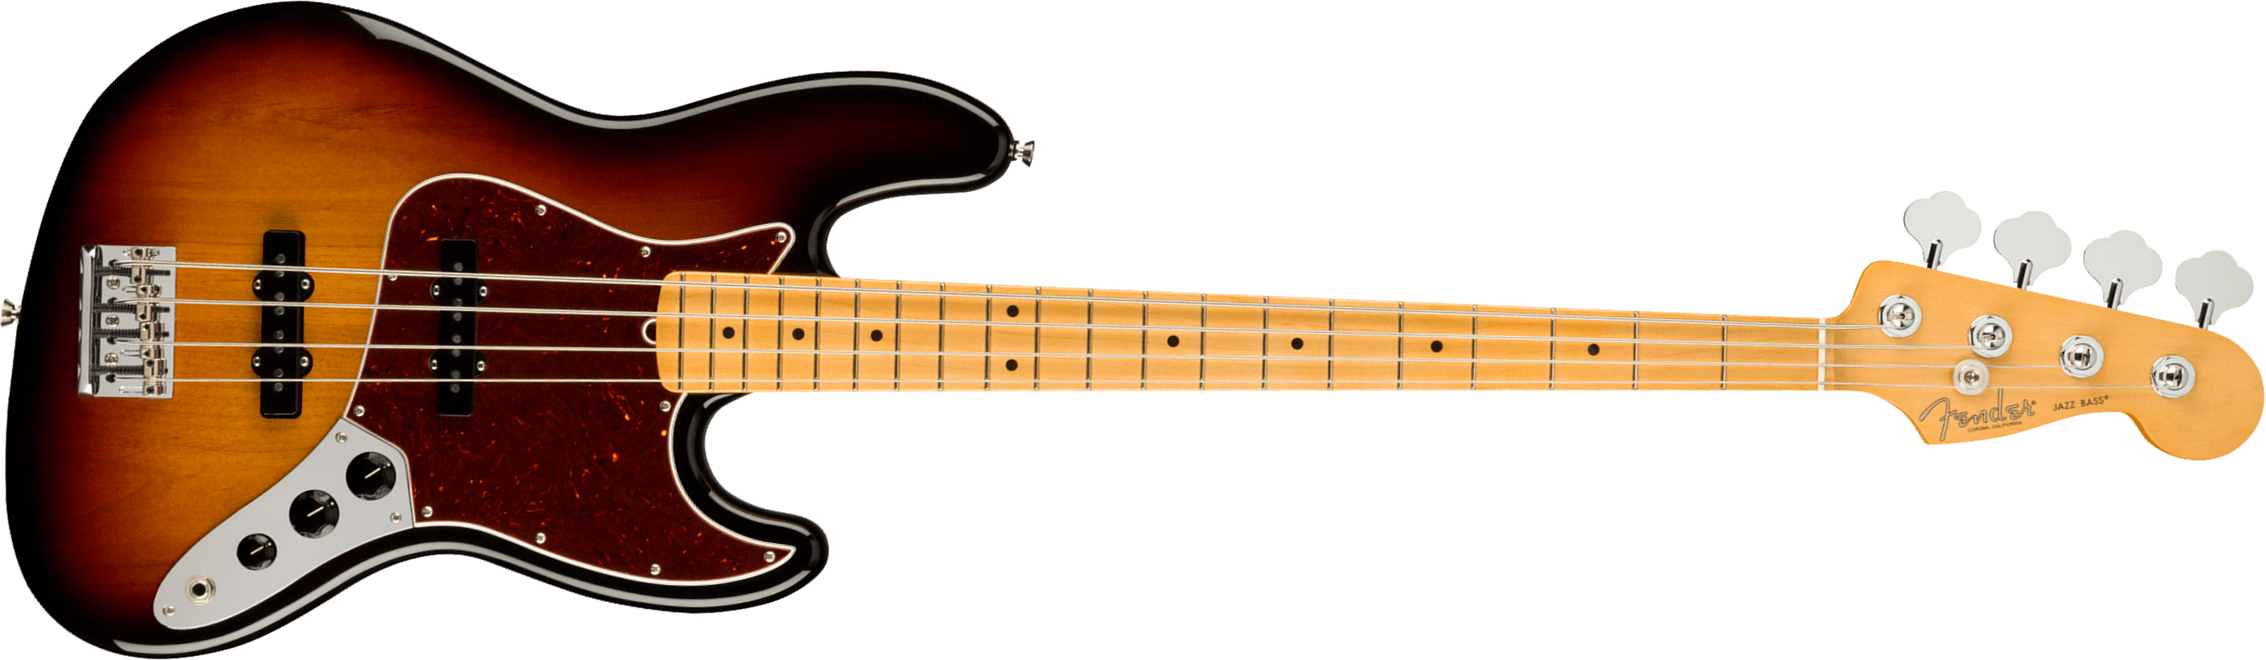 Fender Jazz Bass American Professional Ii Usa Mn - 3-color Sunburst - Solid body electric bass - Main picture